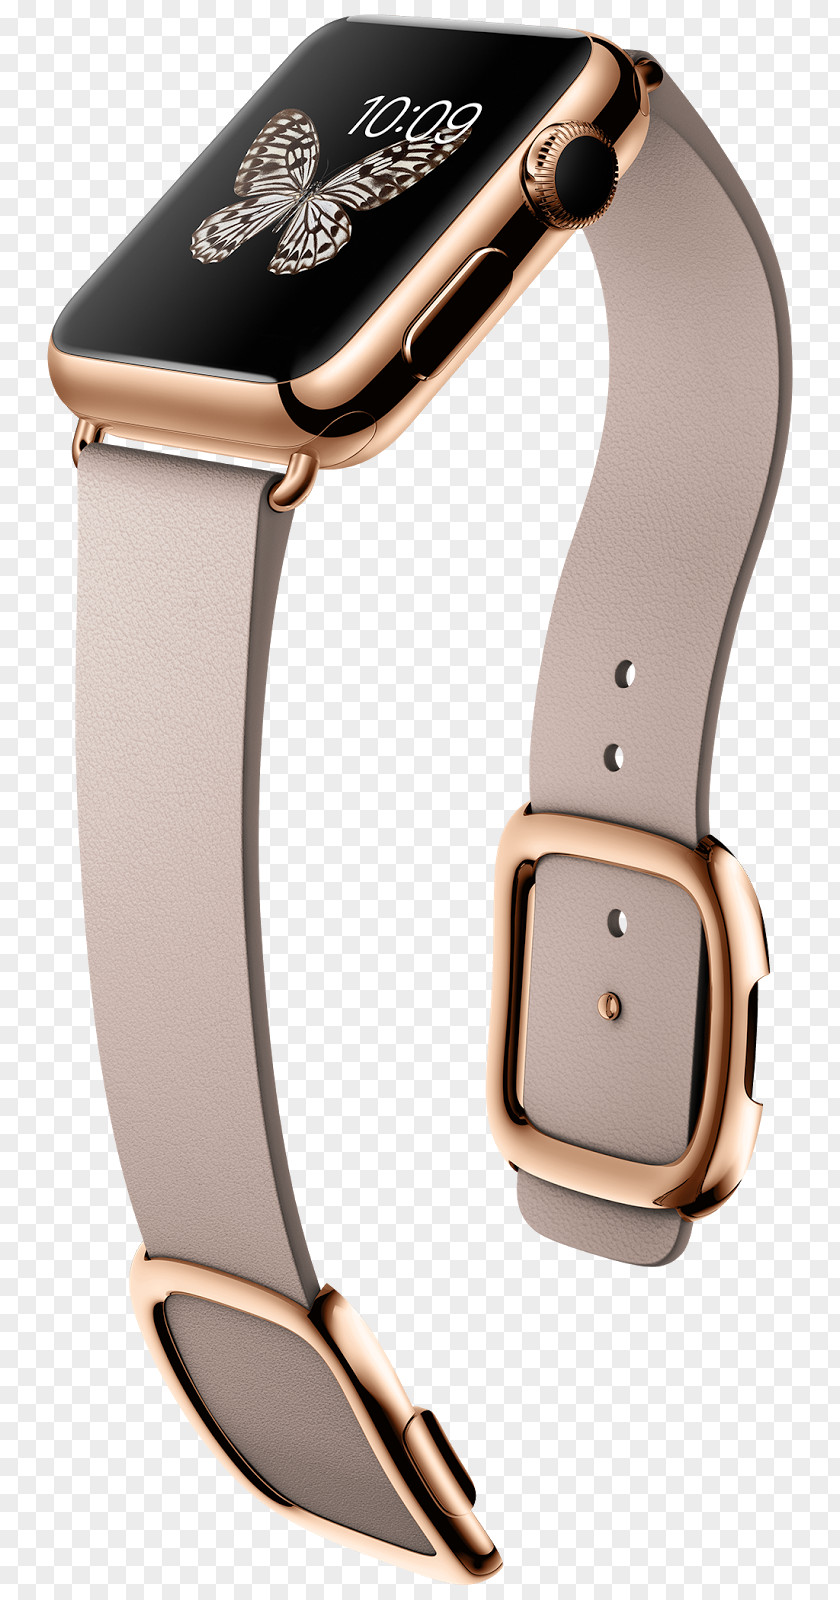 Watches Apple Watch Series 3 2 Smartwatch PNG